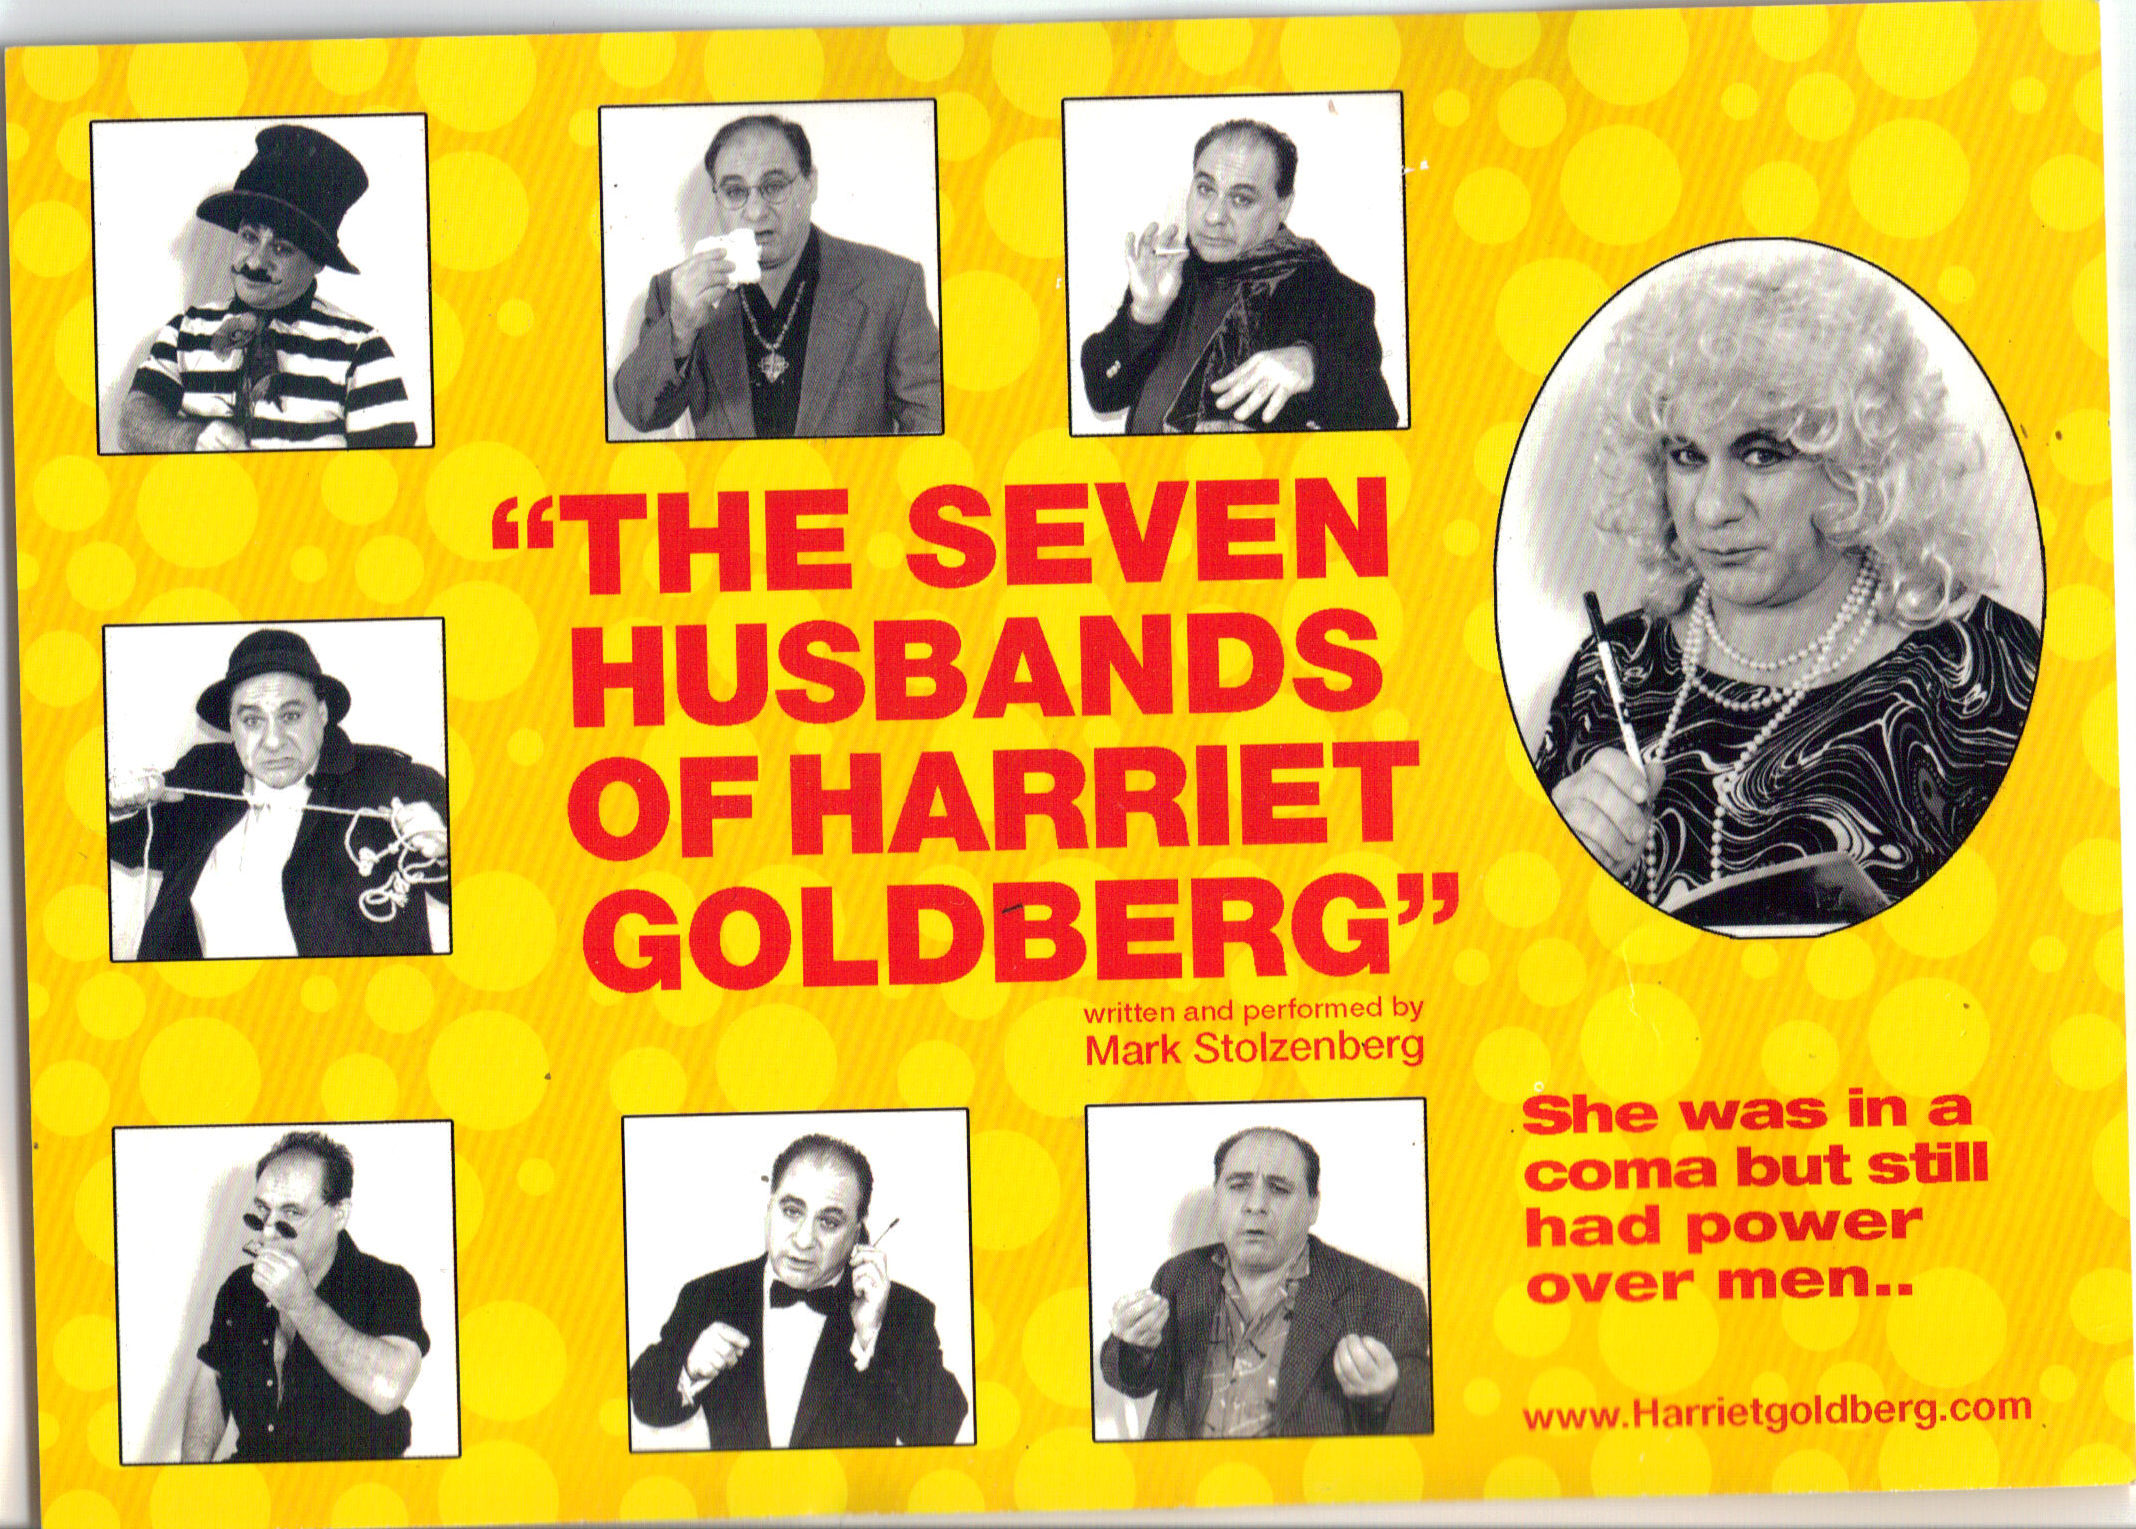 Mark Stolzenberg's One Man Show The Seven Husband's of Harriet Goldberg for The Palace Theatre on west 42 Manhattan All played by Mark